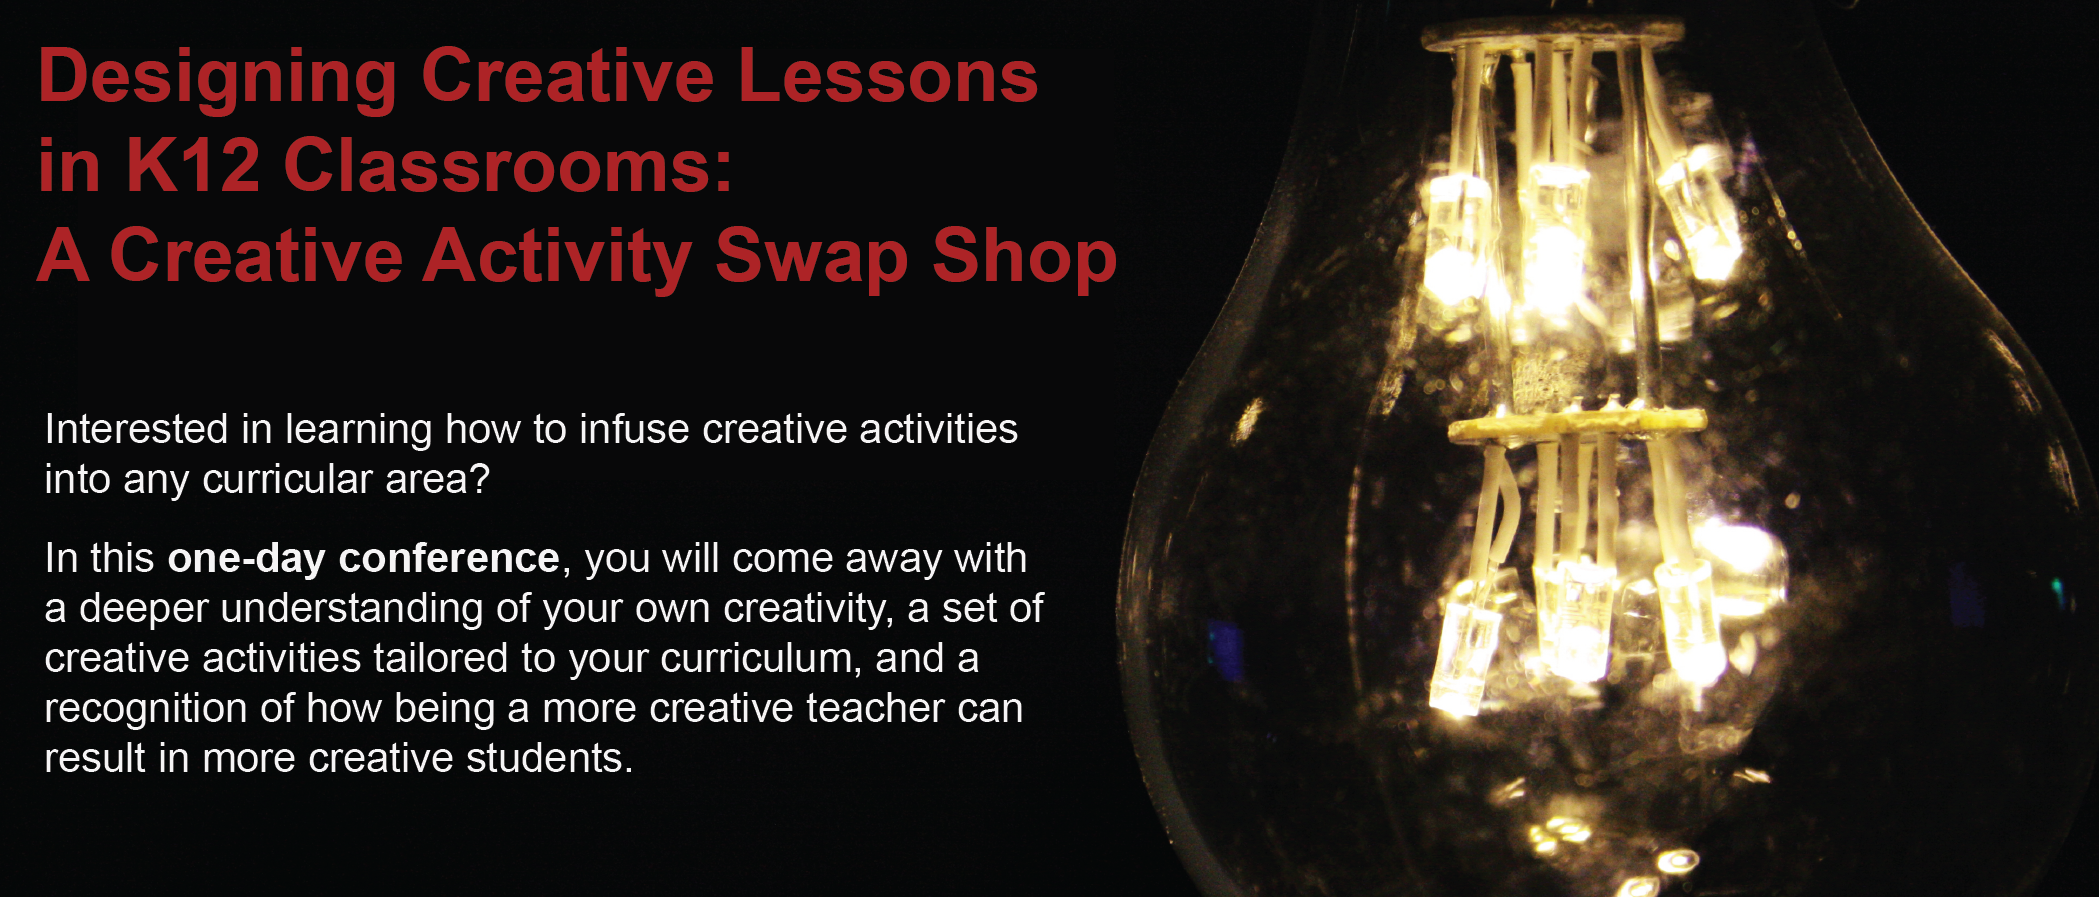 Designing Creative Lessons in K12 Classrooms: A Creative Activity Swap Shop